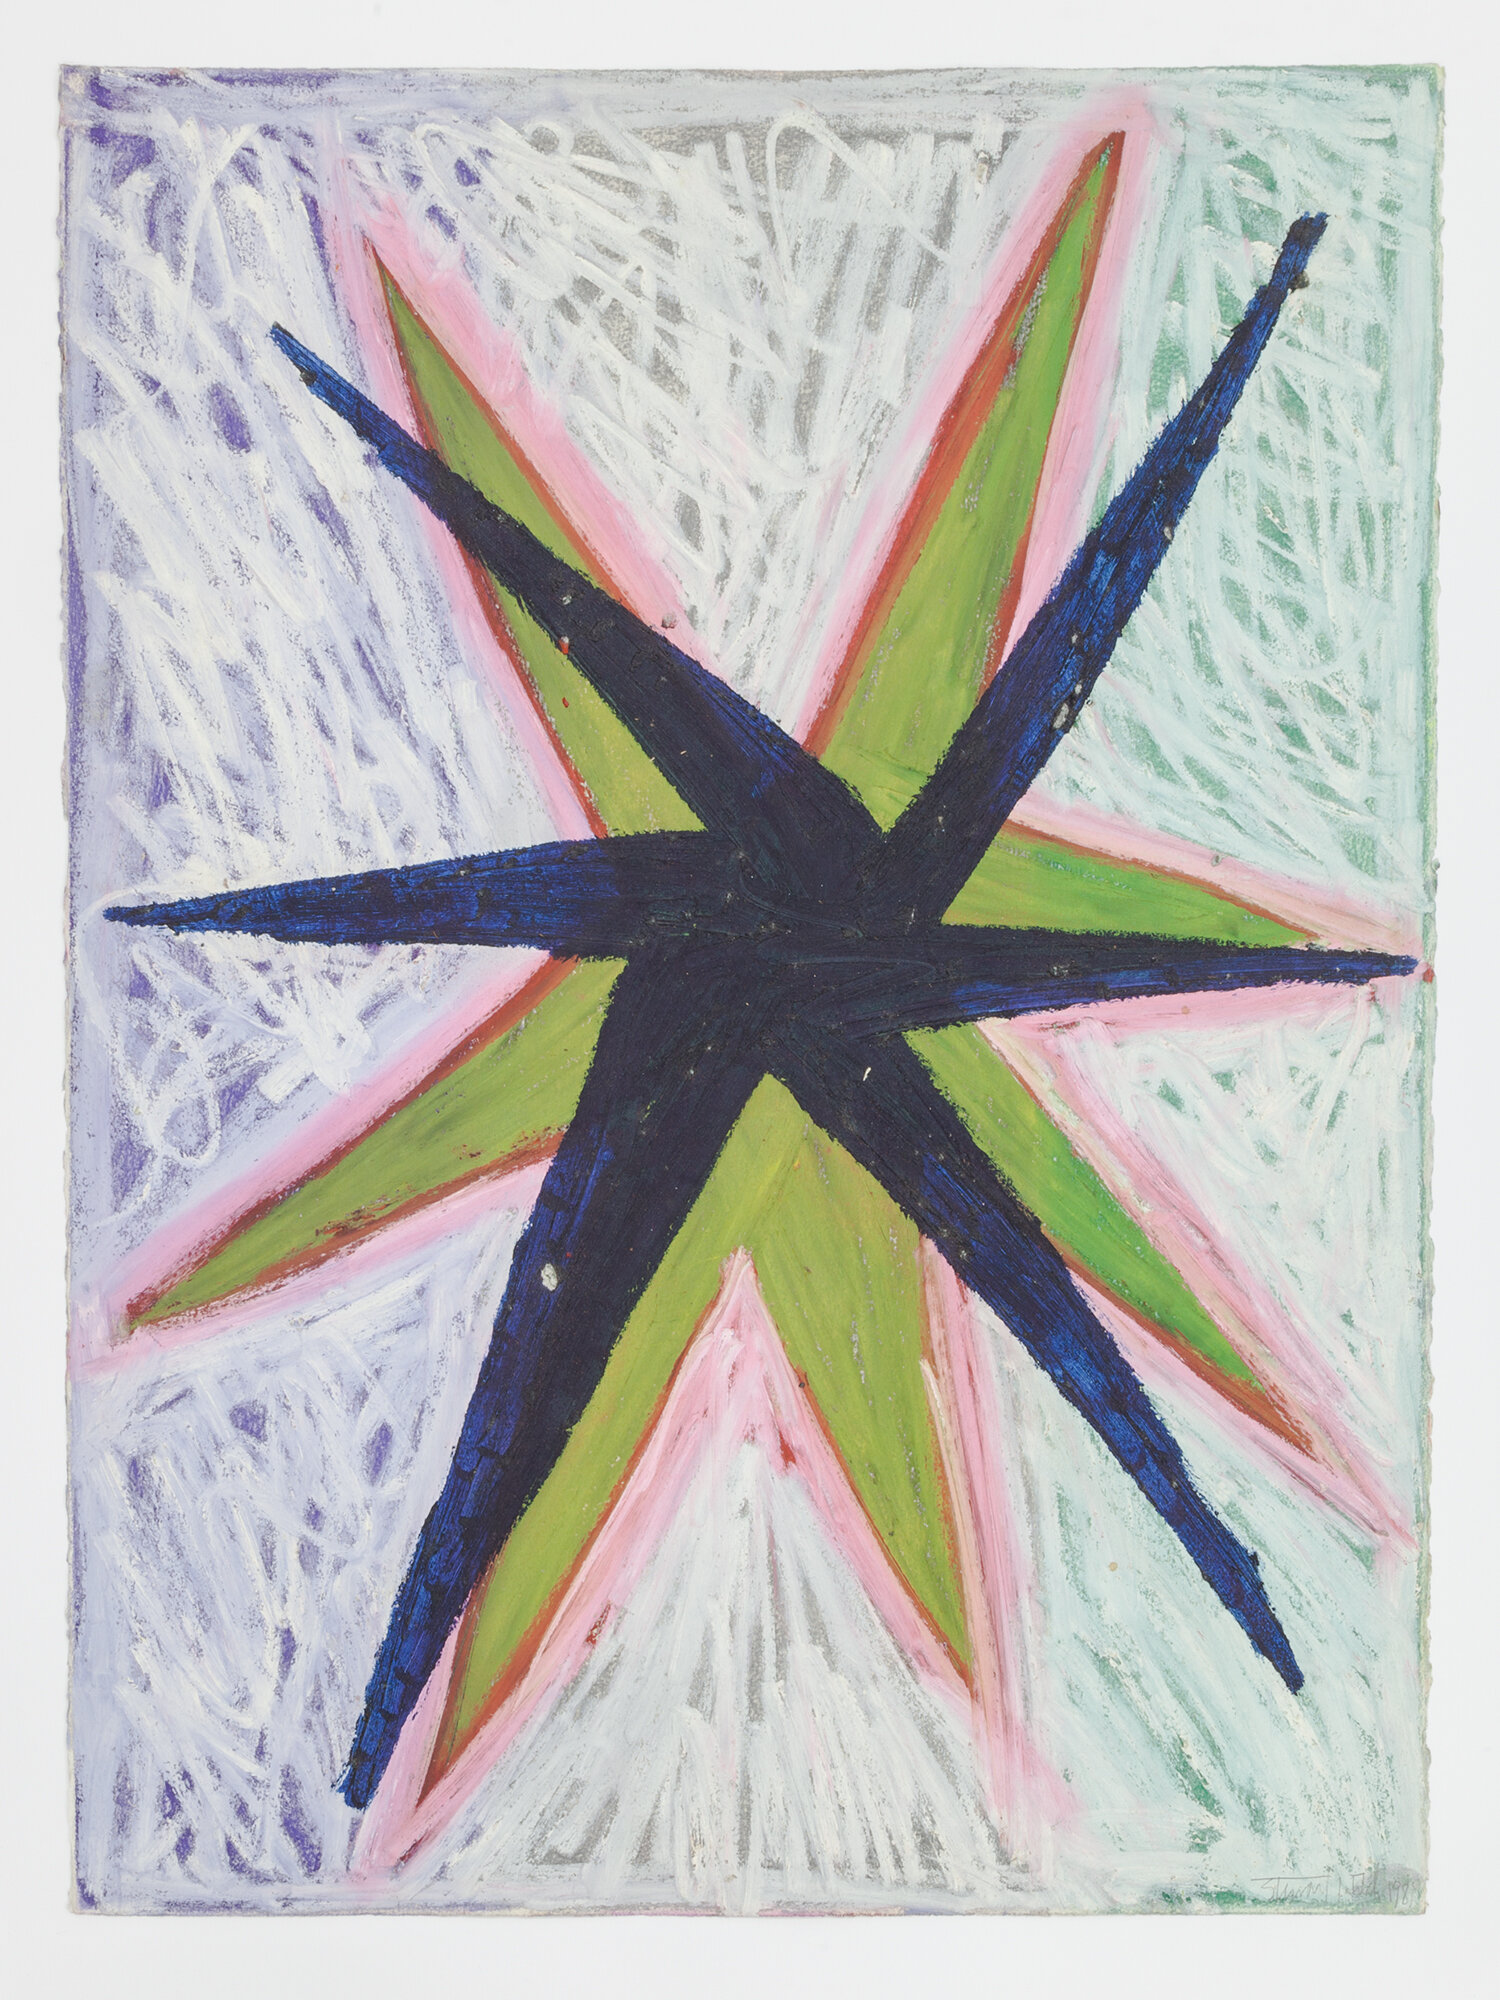  Stewart Hitch,  Untitled , 1981, Oil stick on paper 30 x 22 inches 